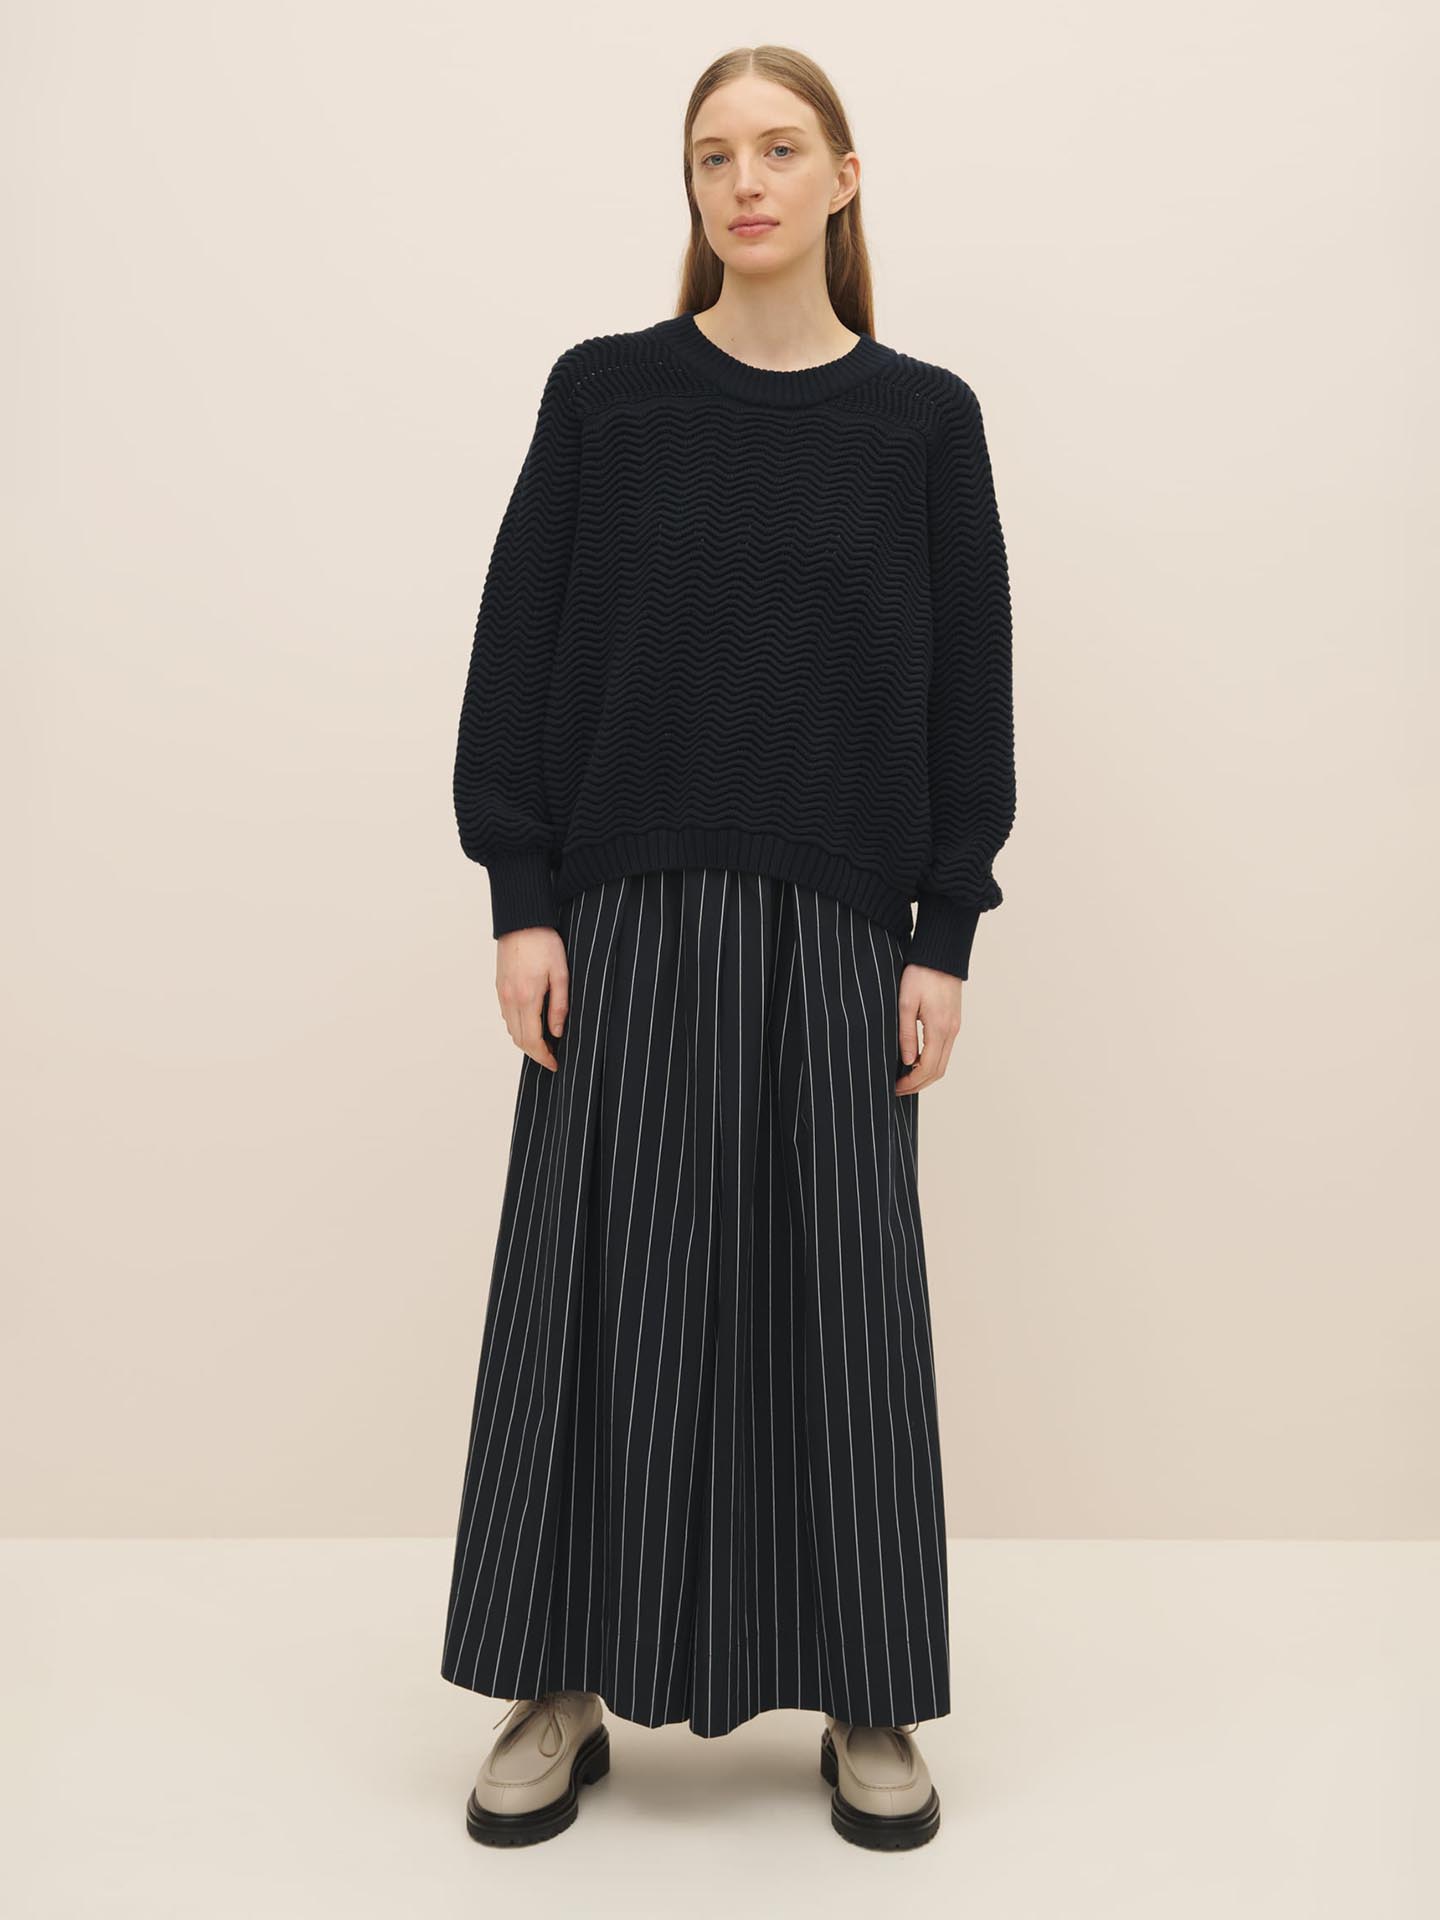 A woman in a Kowtow Zig Zag Crew – Indigo sweater and striped skirt stands against a pale background, wearing white platform shoes.